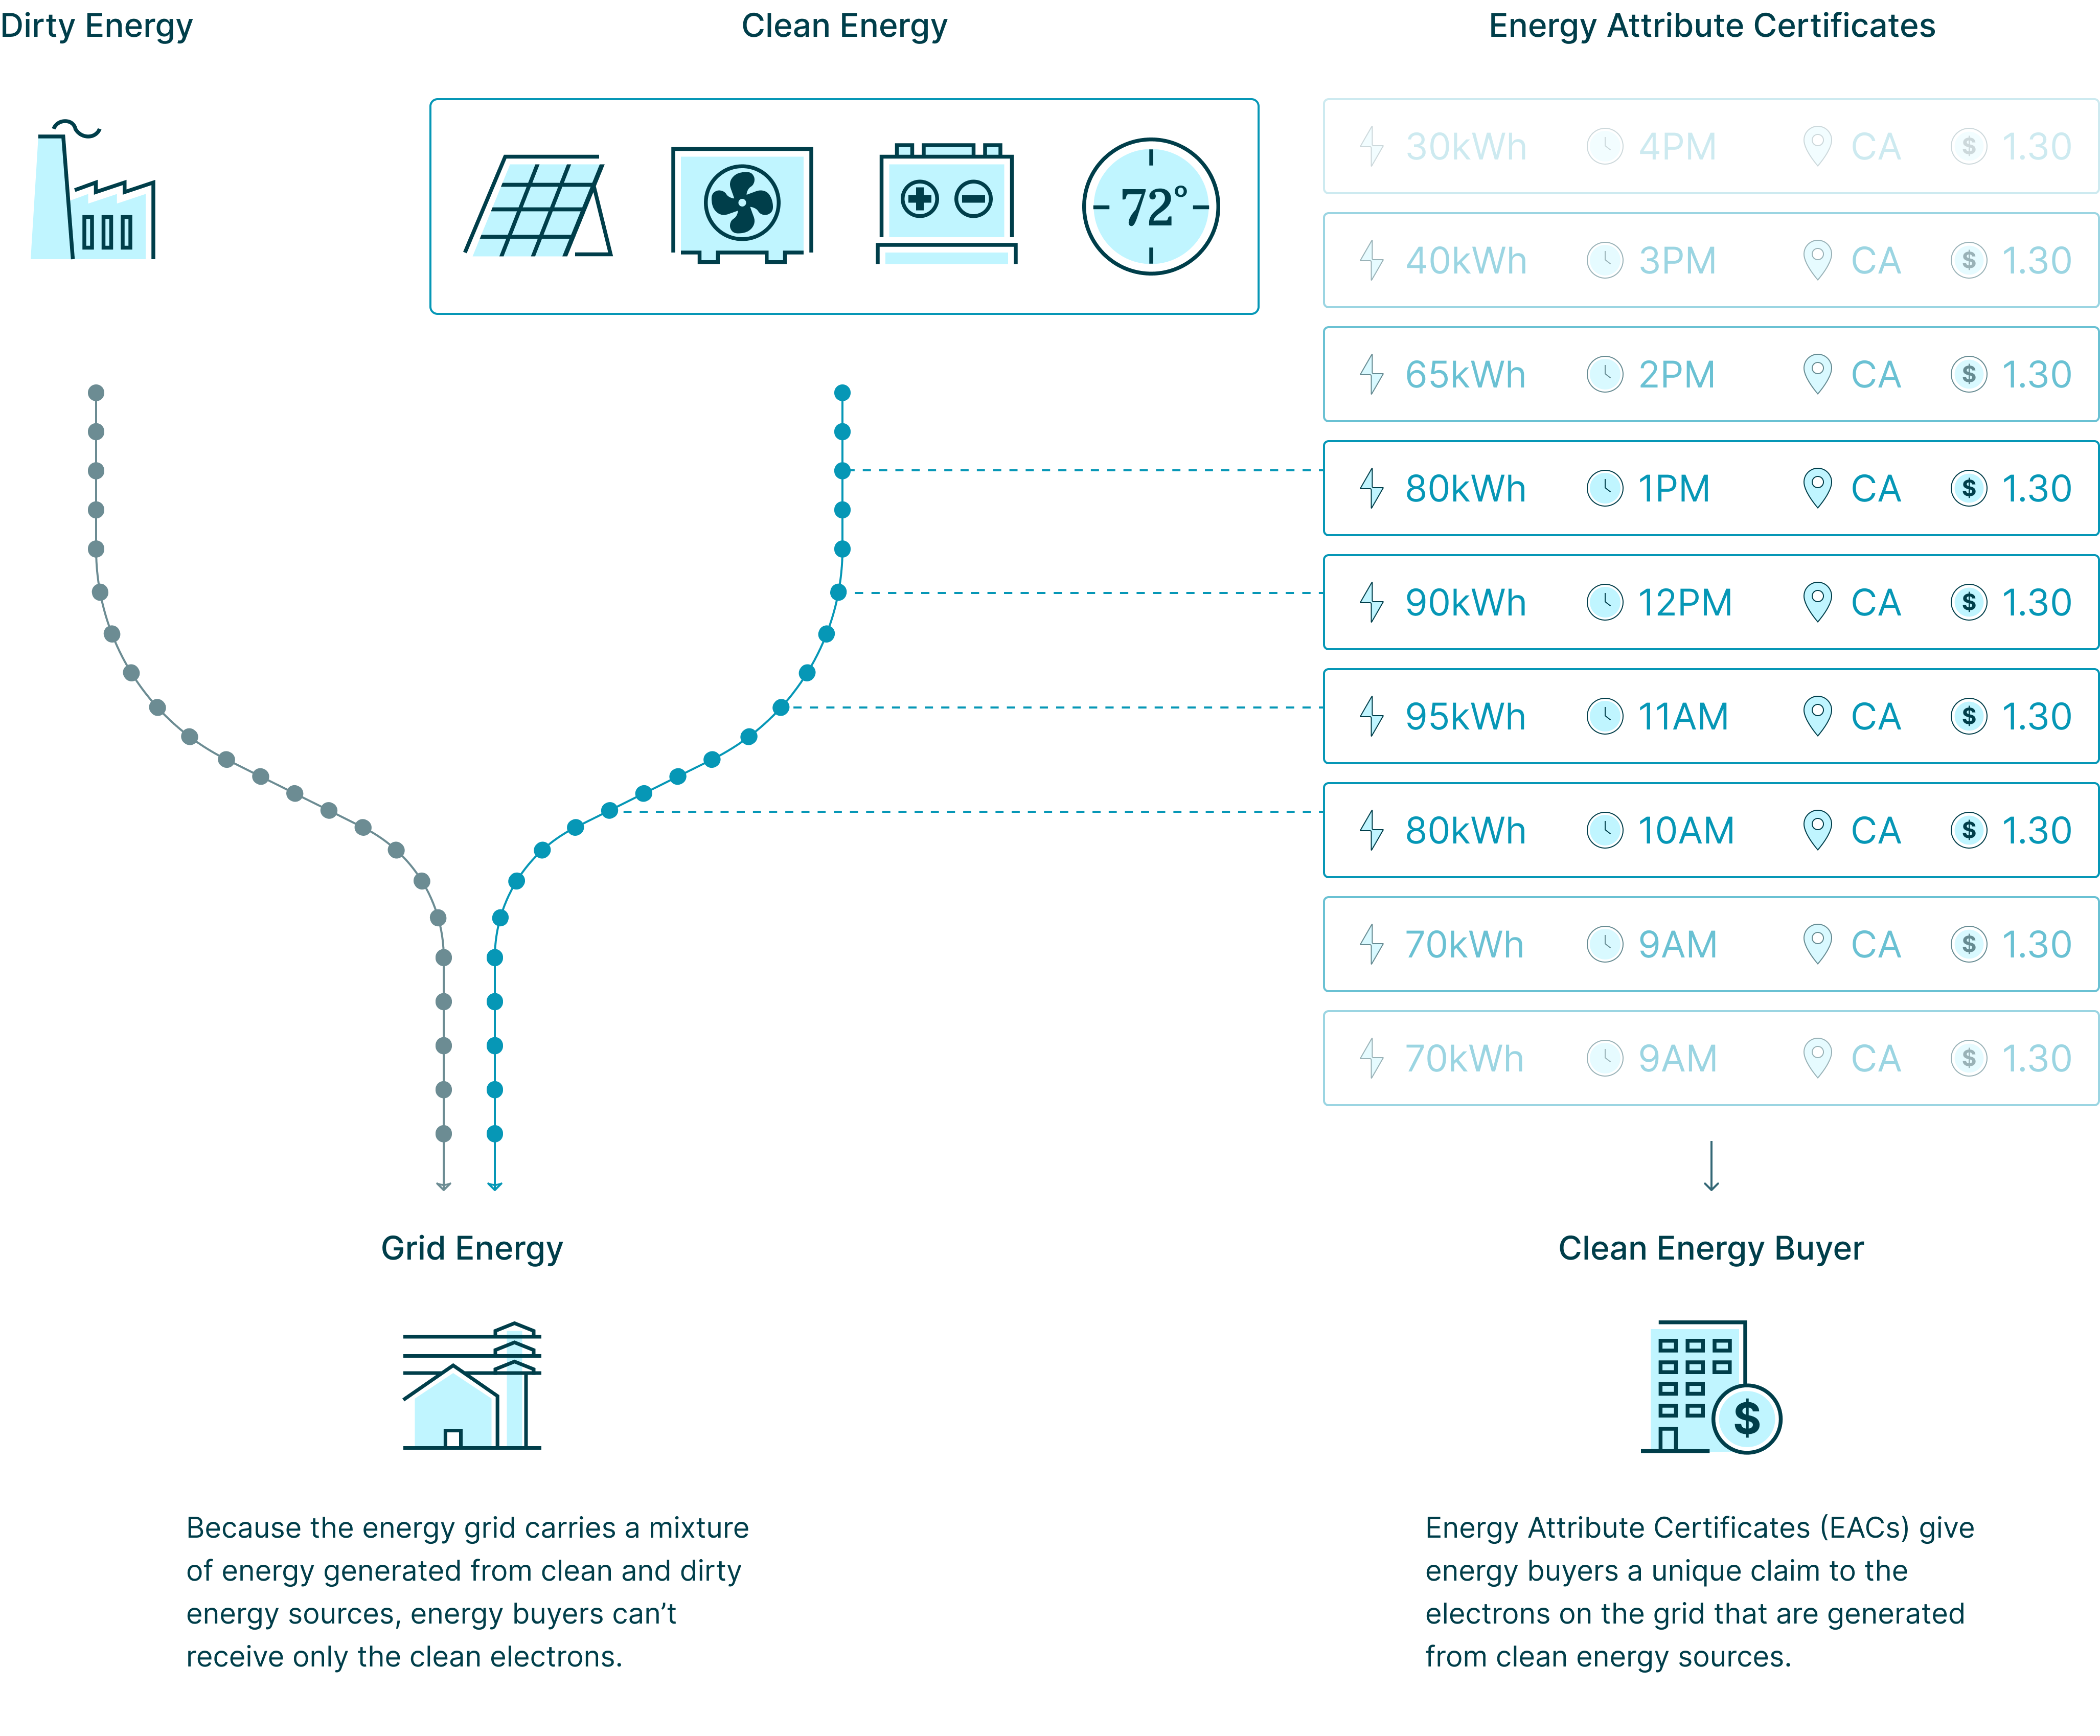 Because the energy grid carries a mixture of energy generated from clean and dirty energy sources, energy buyers can't receive only the clean electrons. Energy Attribute Certificates (EACs) give energy buyers a unique claim to the electrons on the grid that are generated from clean energy sources.